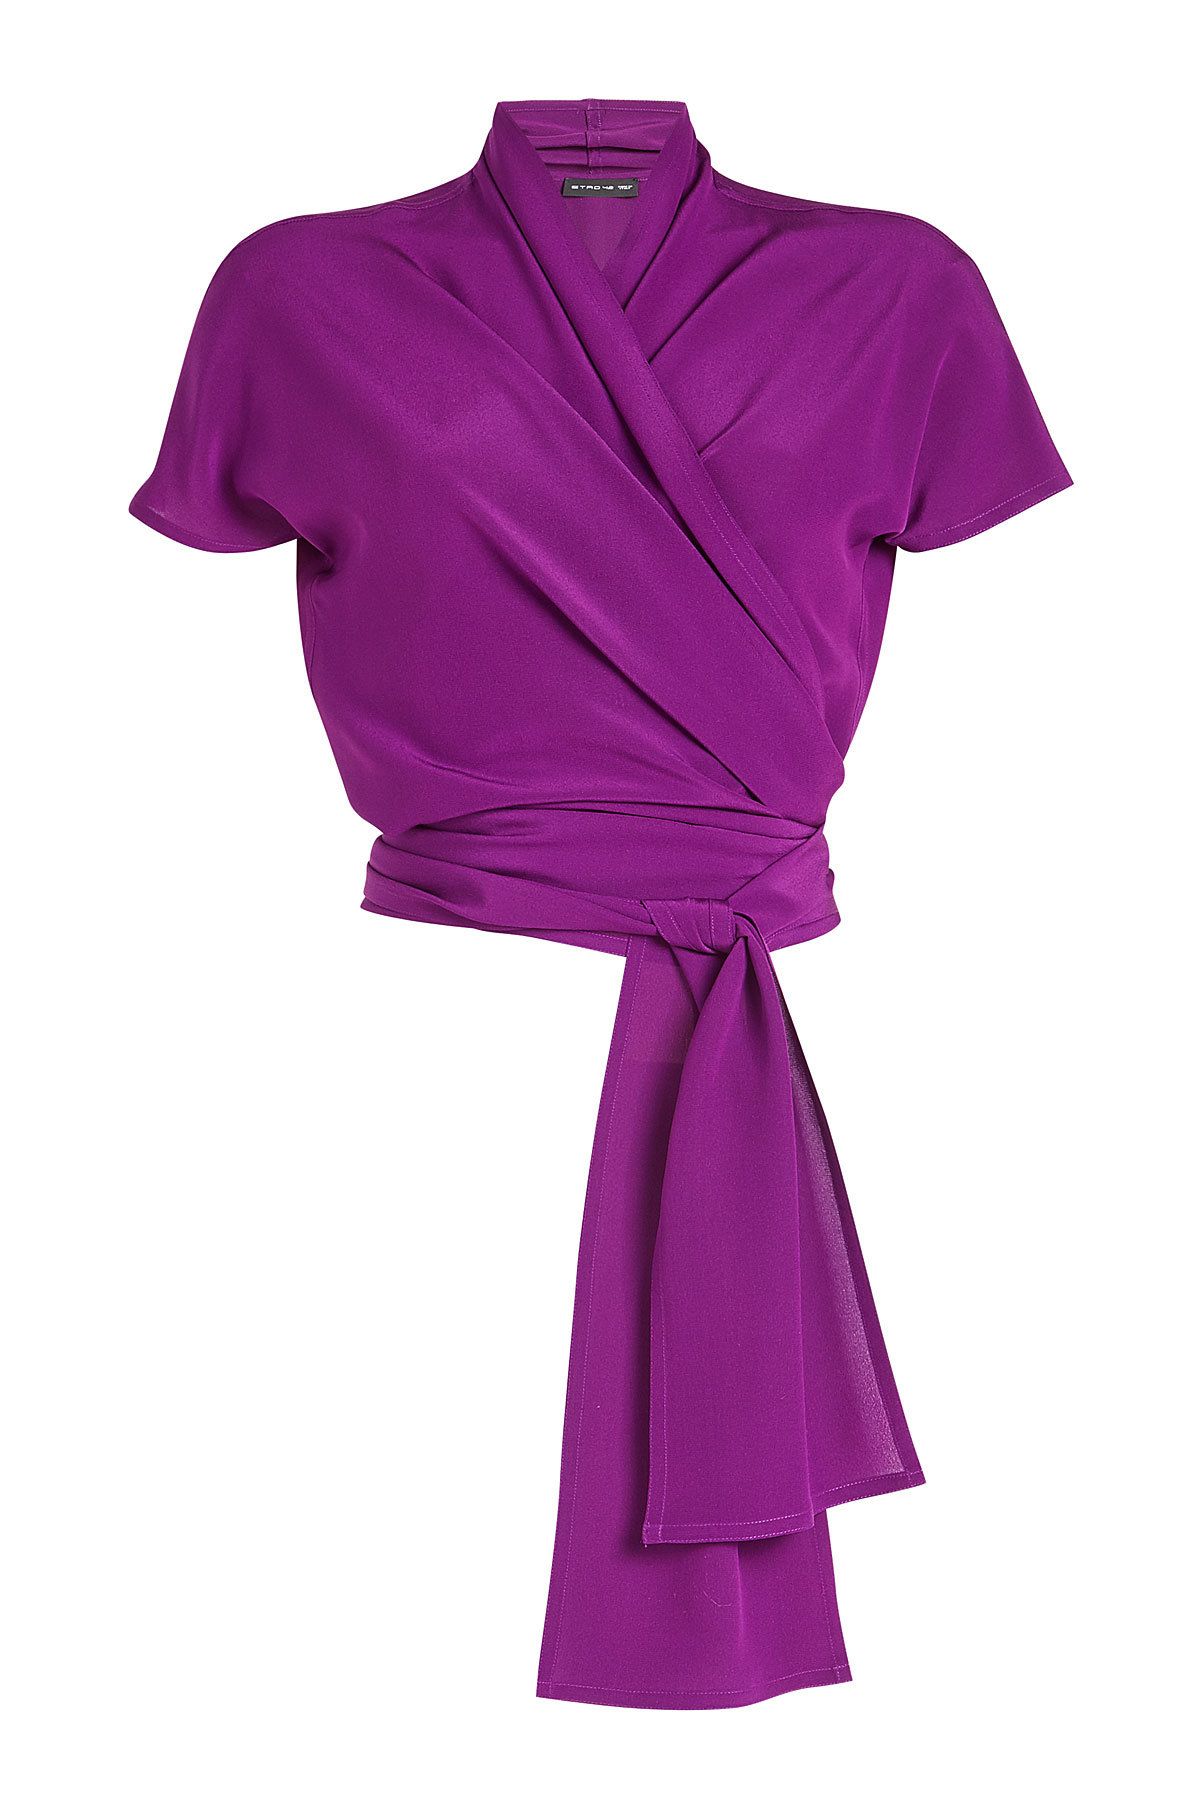 Make a Statement with Purple Blouses